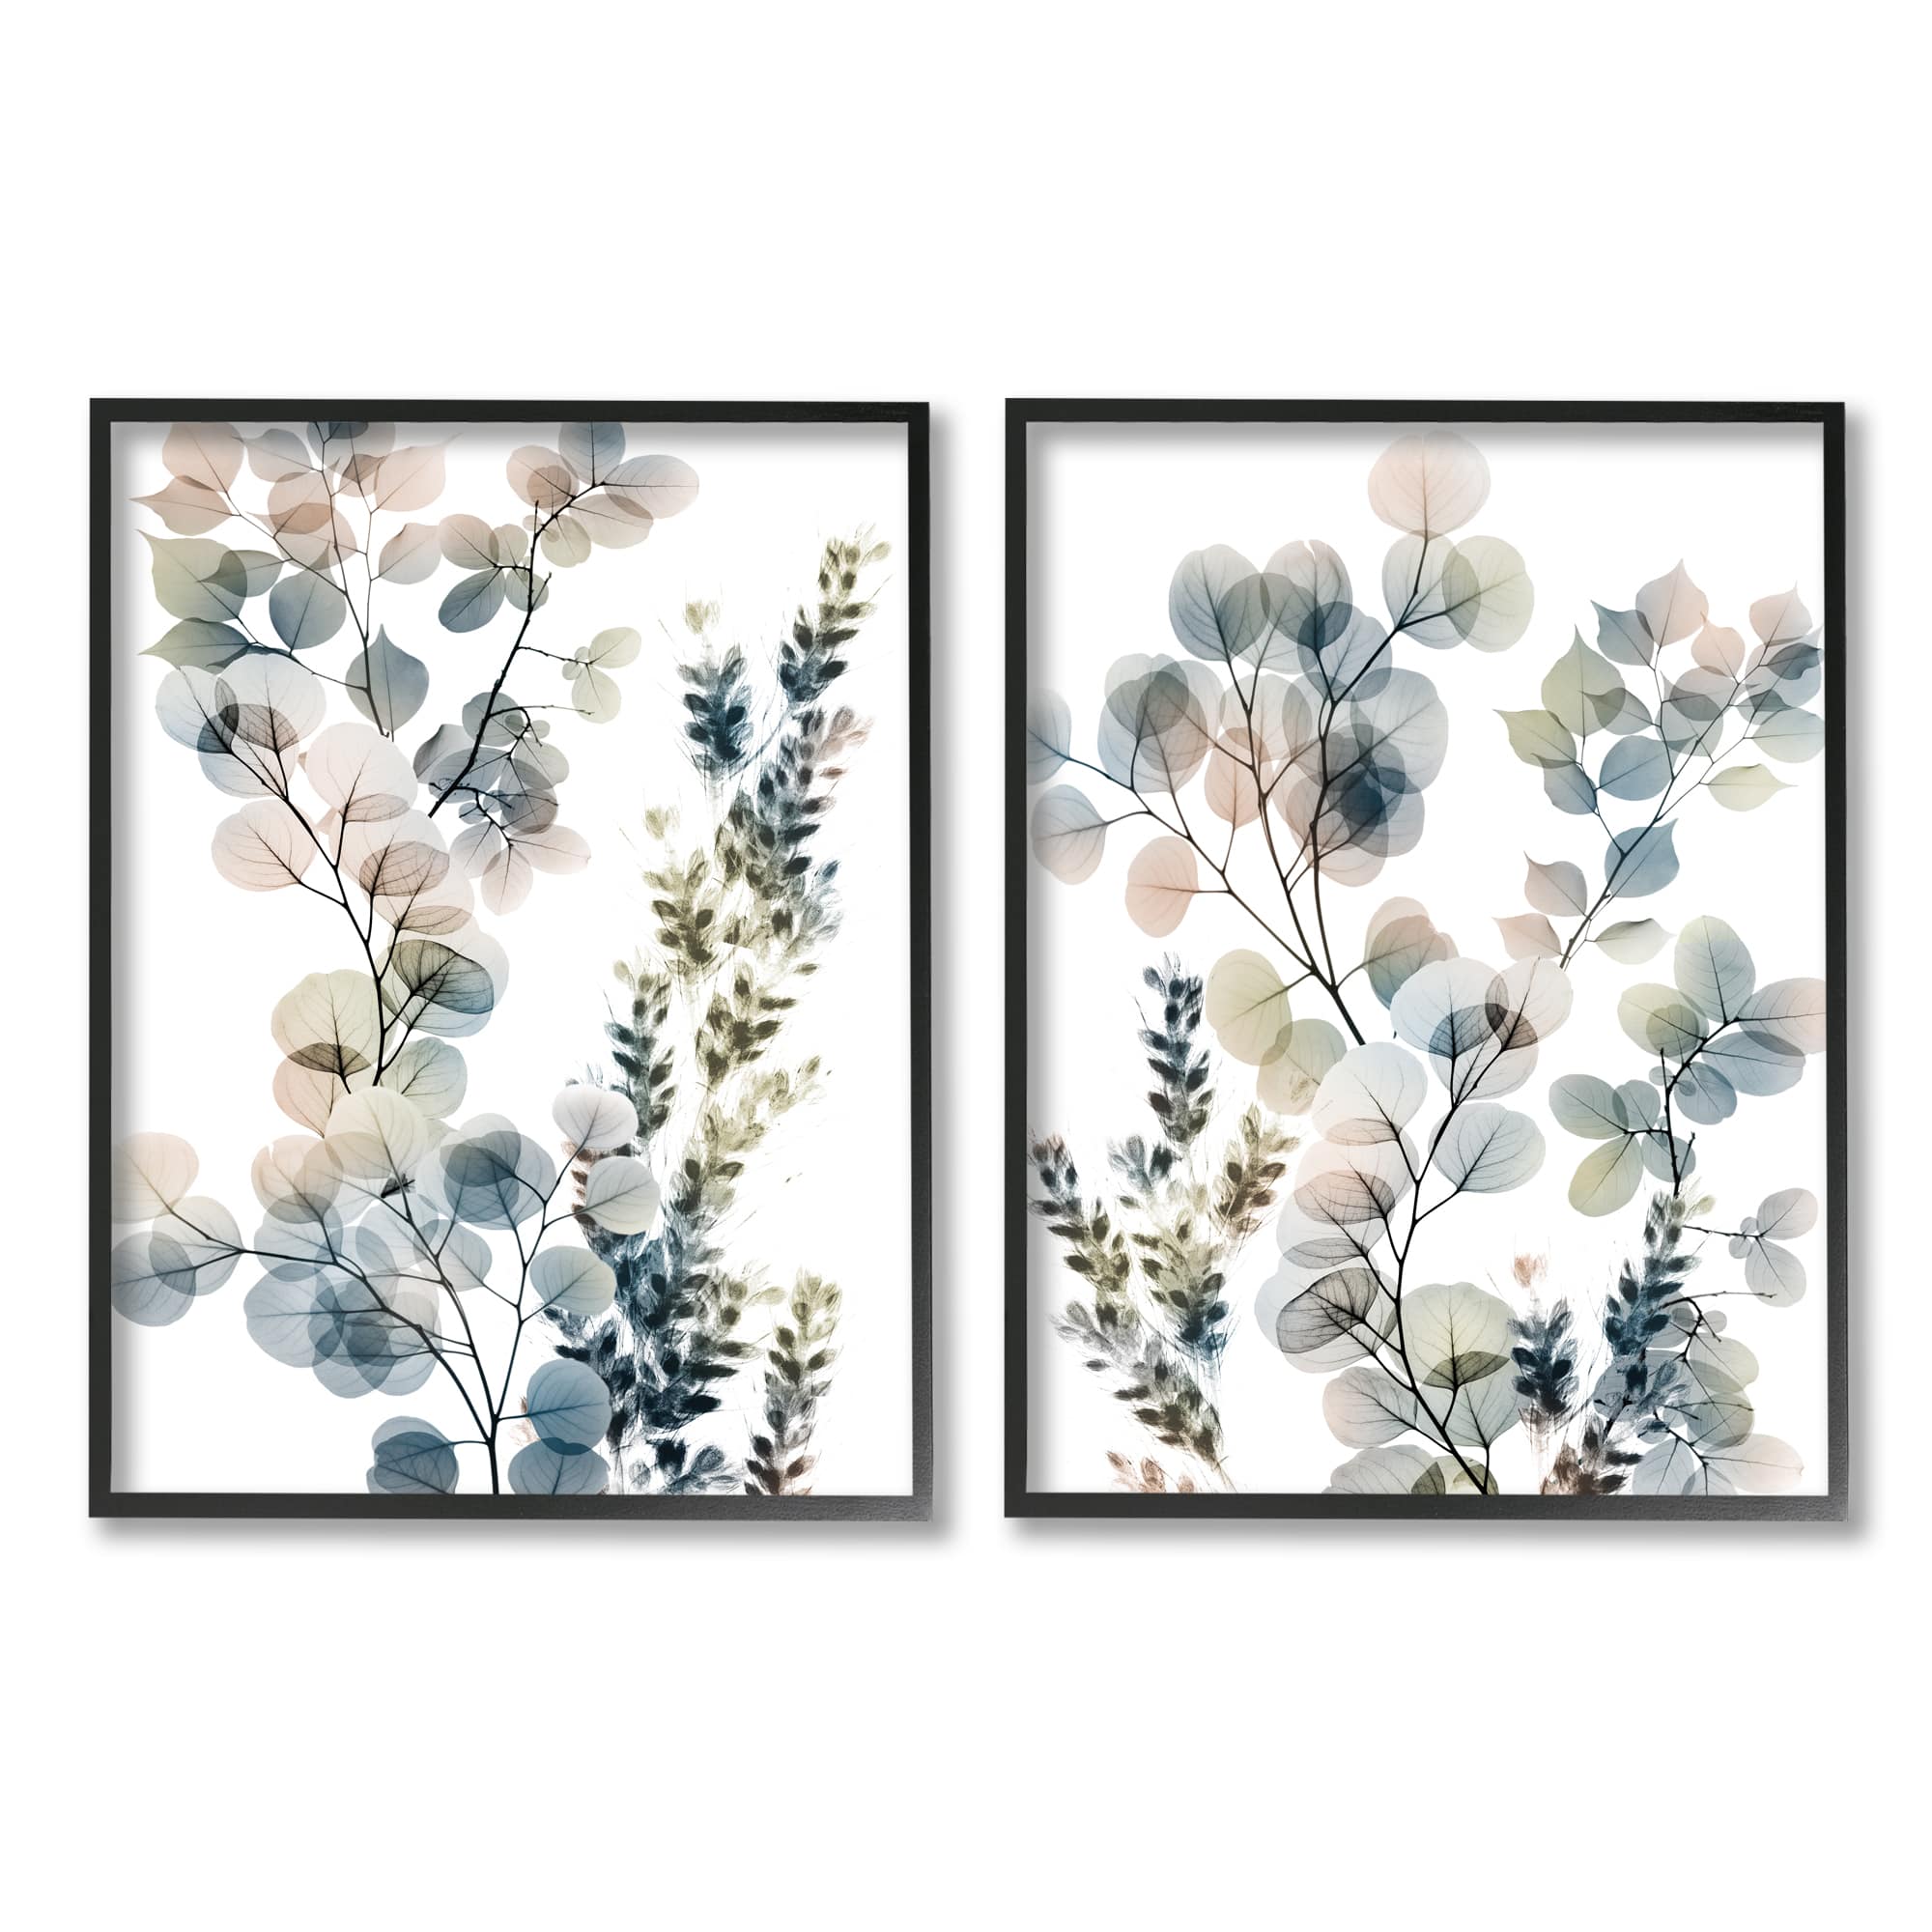 Stupell Industries Collage of Translucent Plants Blue Green Beige in Black Frame Wall Art